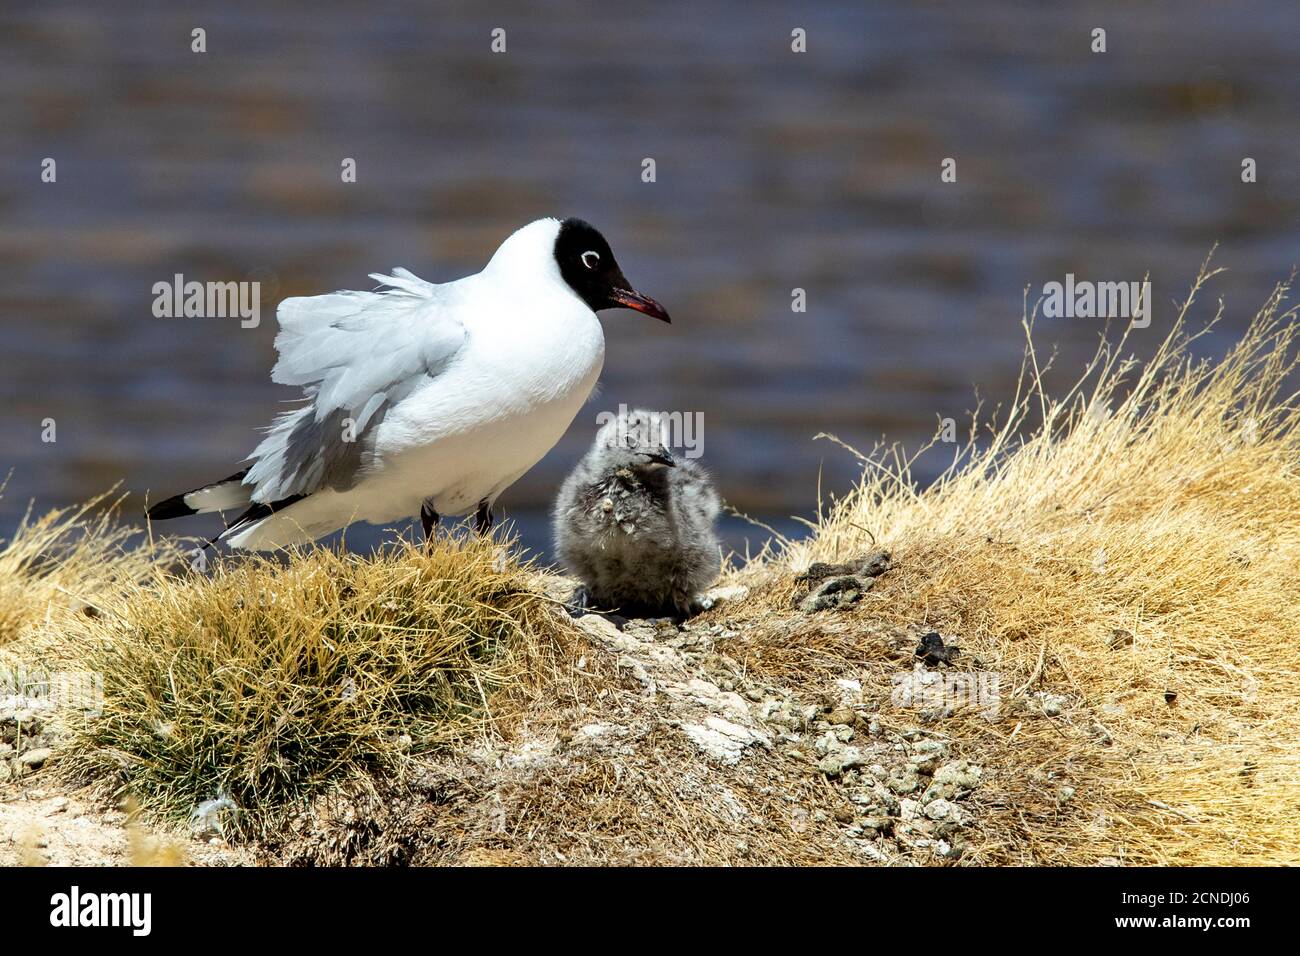 An adult Andean gull (Chroicocephalus serranus), with chick near its nest, Andean Central Volcanic Zone, Chile Stock Photo